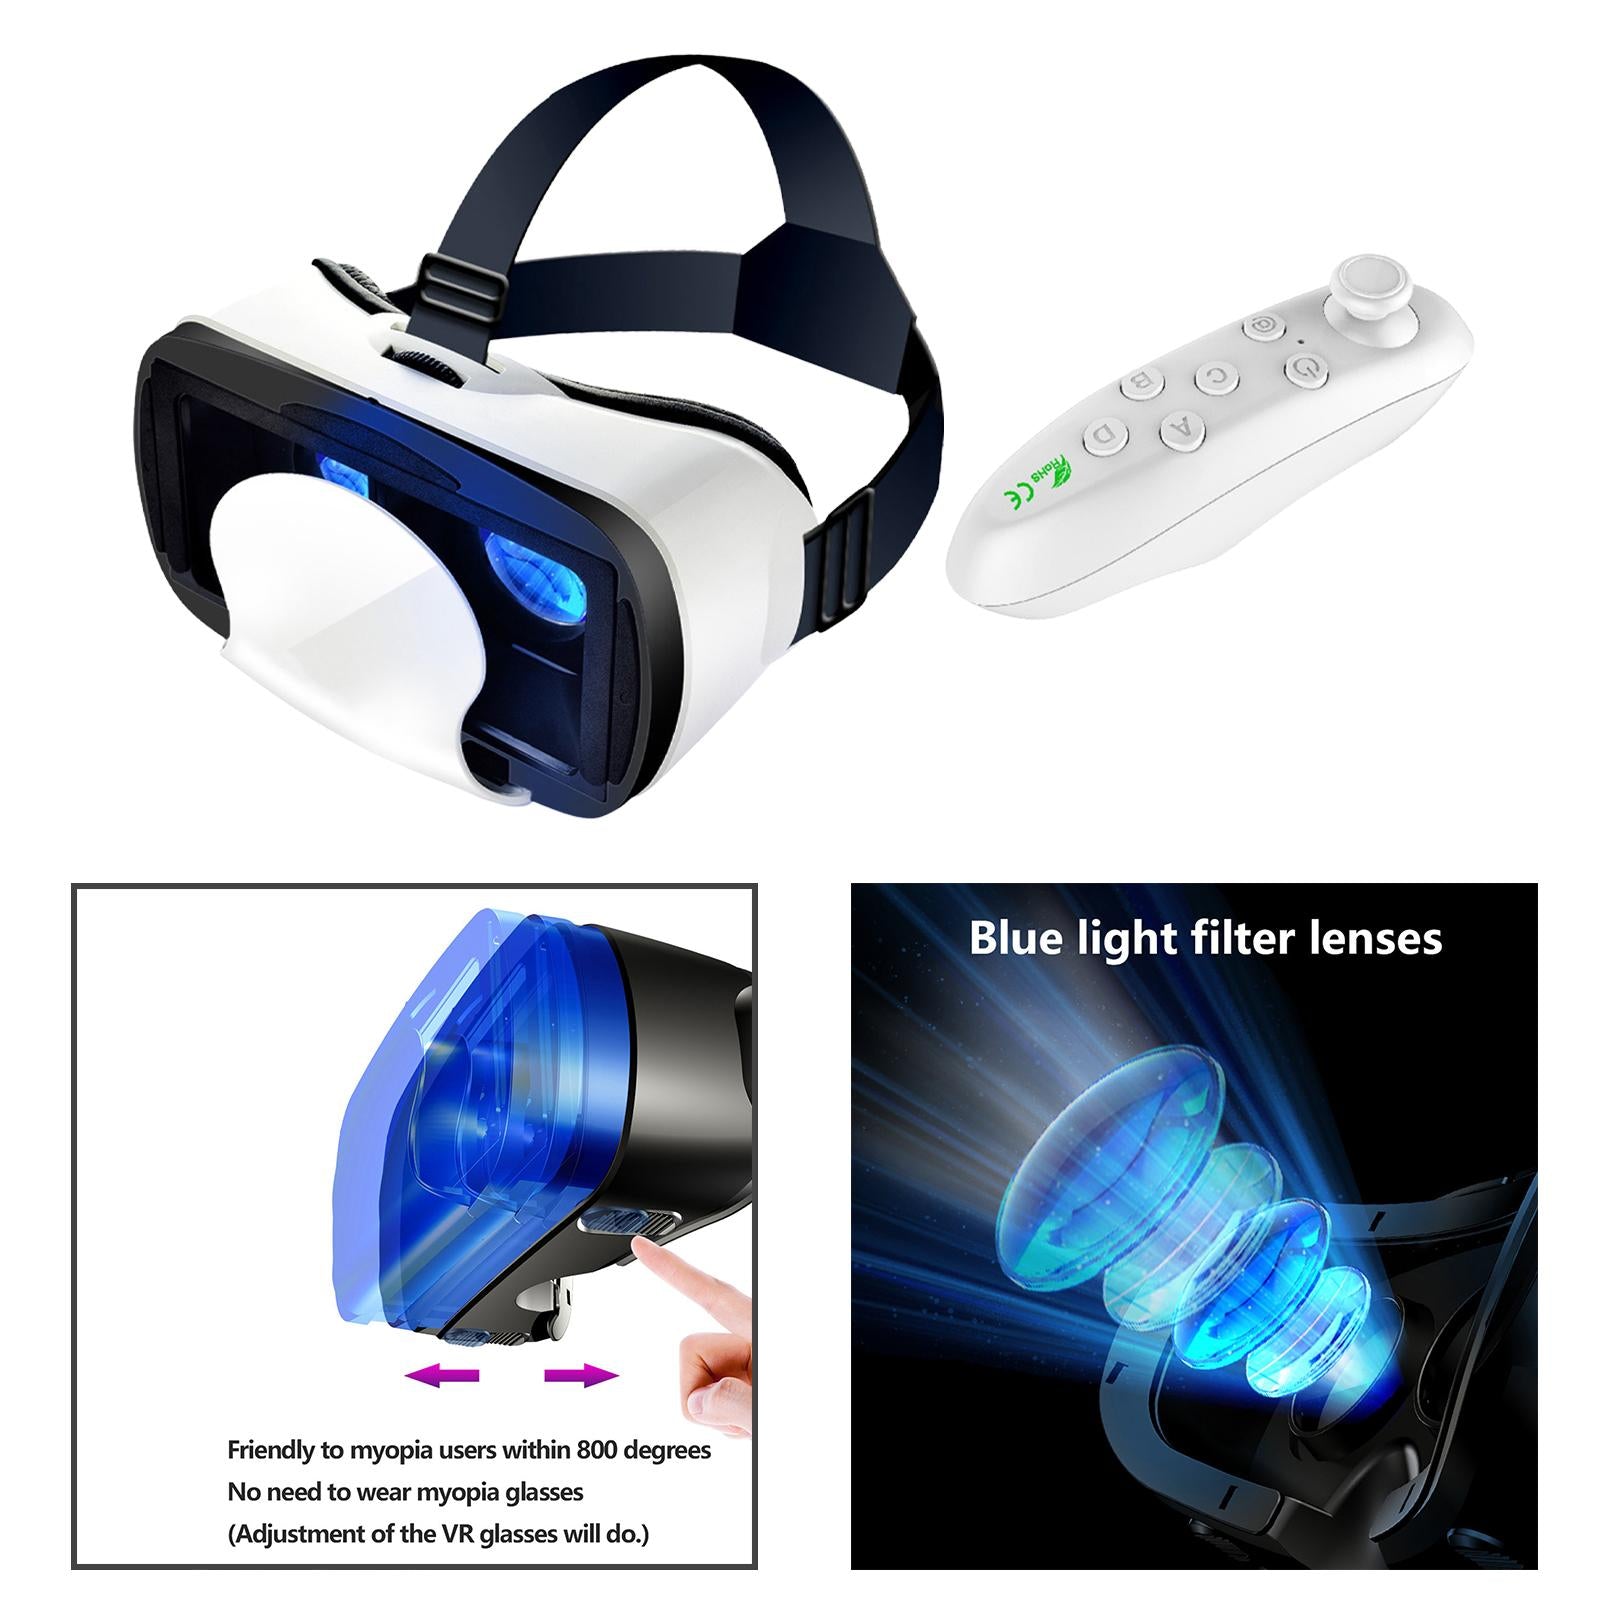 VR Headset Adjustable Blue Light protected Universal for Mobile Games with Controller